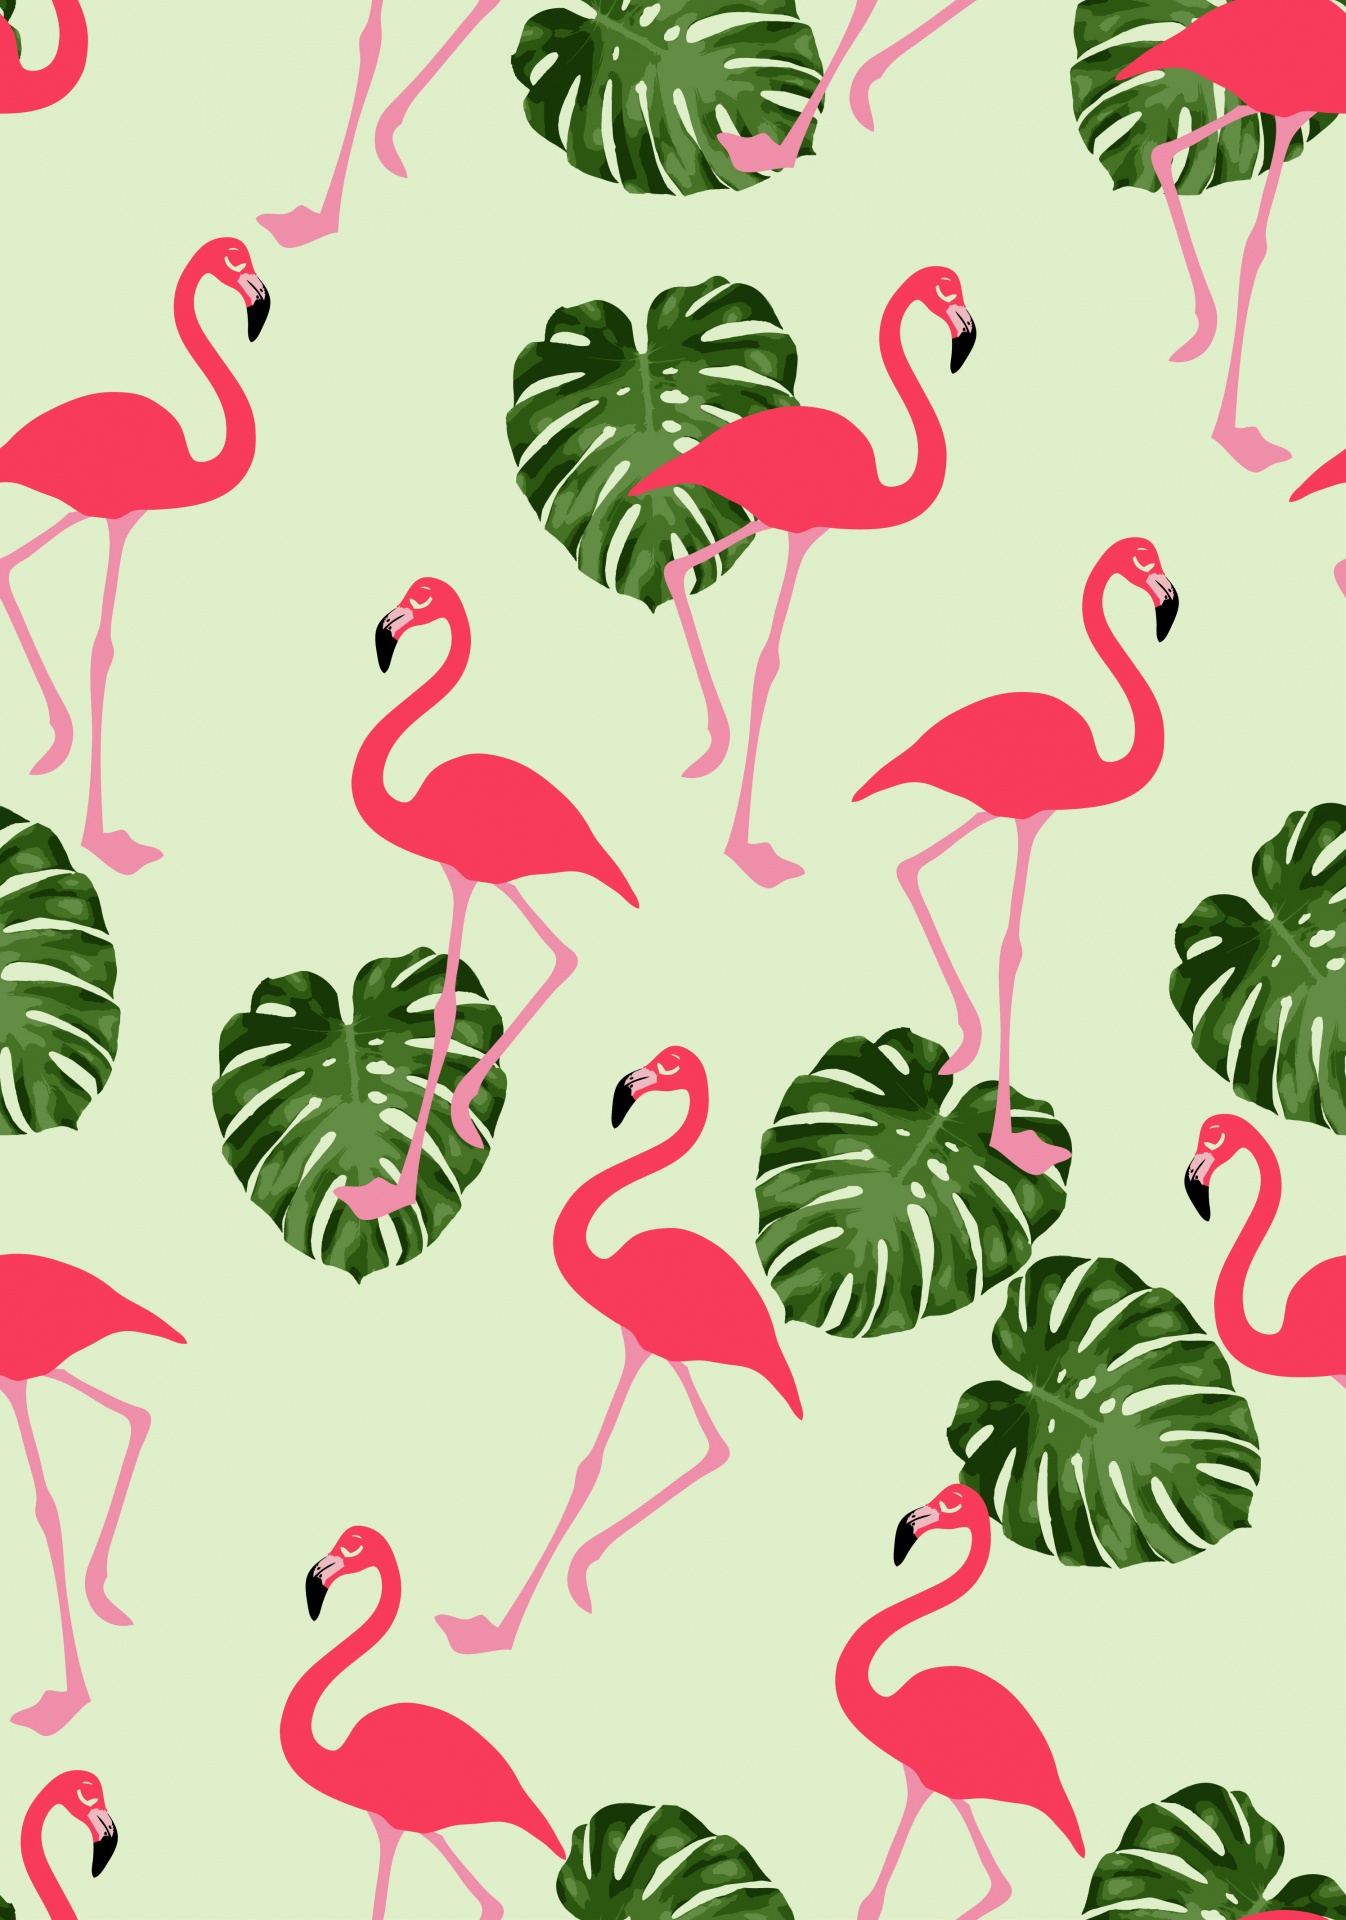 Download free photo of Flamingo, wallpaper, paper, background, pattern